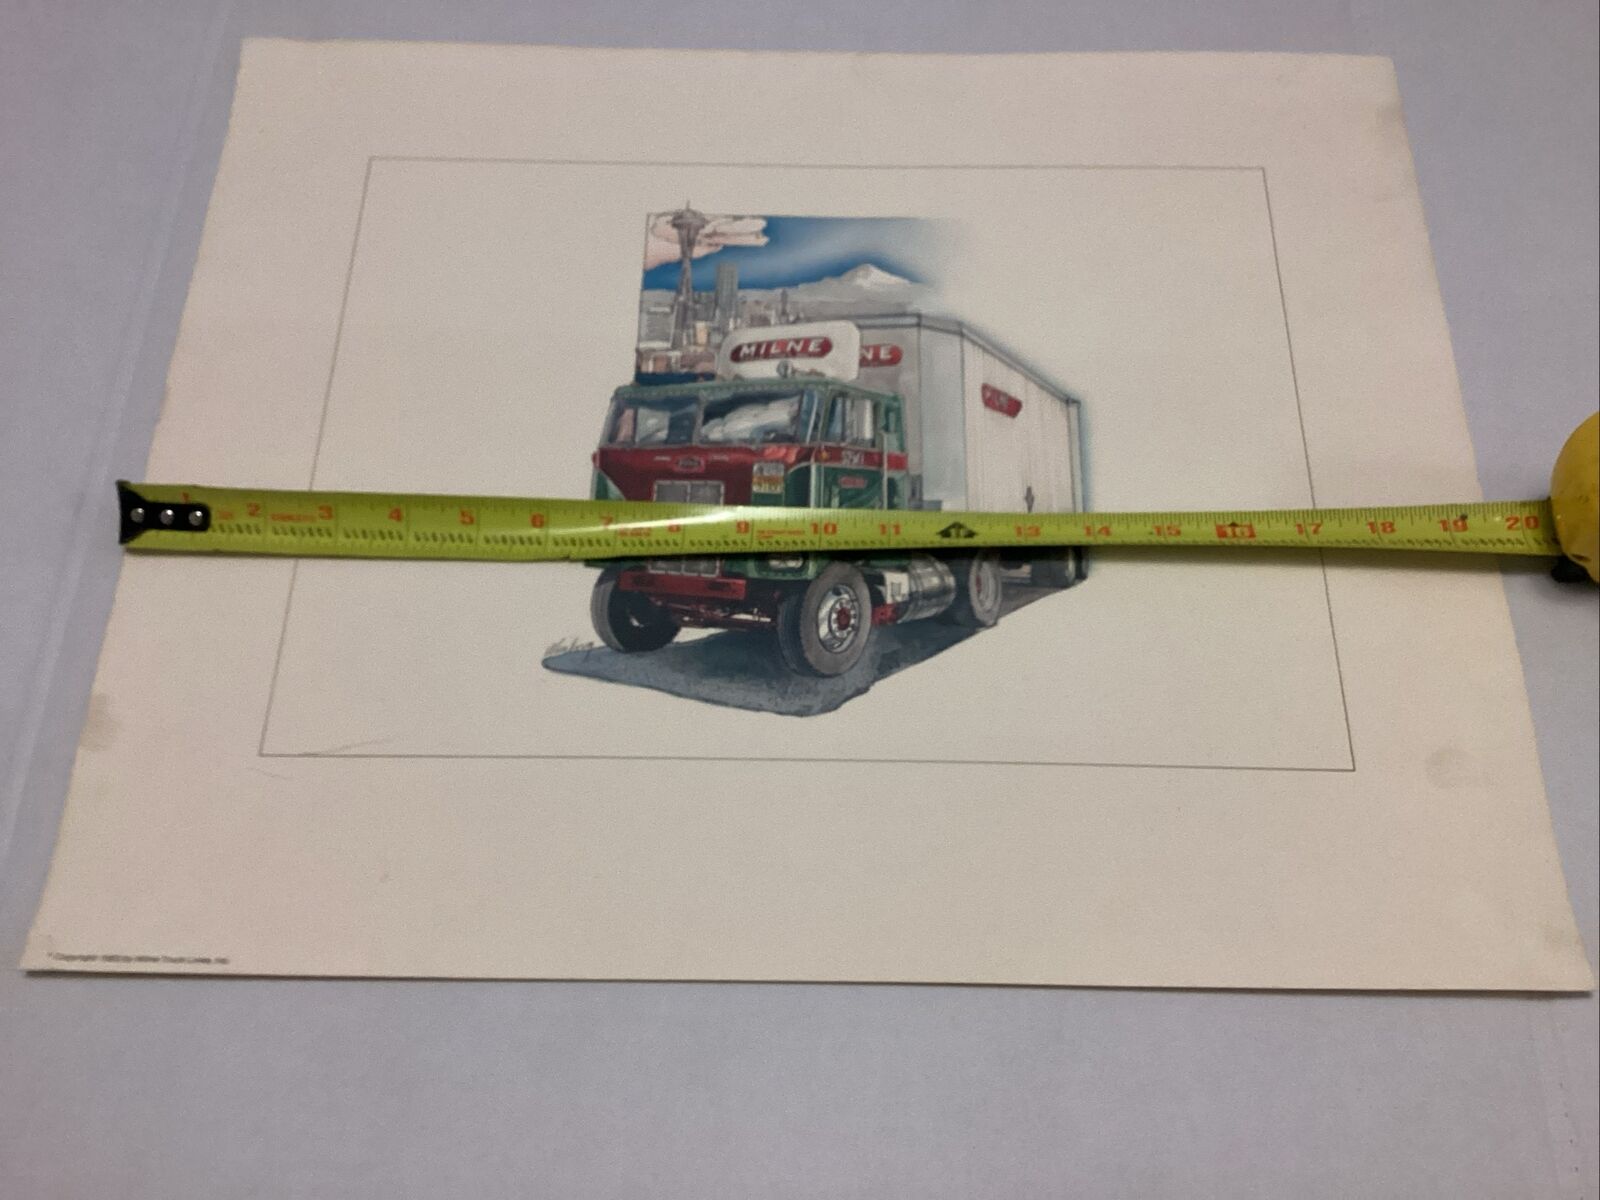 1983 MILNE Freight Truck  Lines Print  Larry Winborg Art Seattle Space Needle